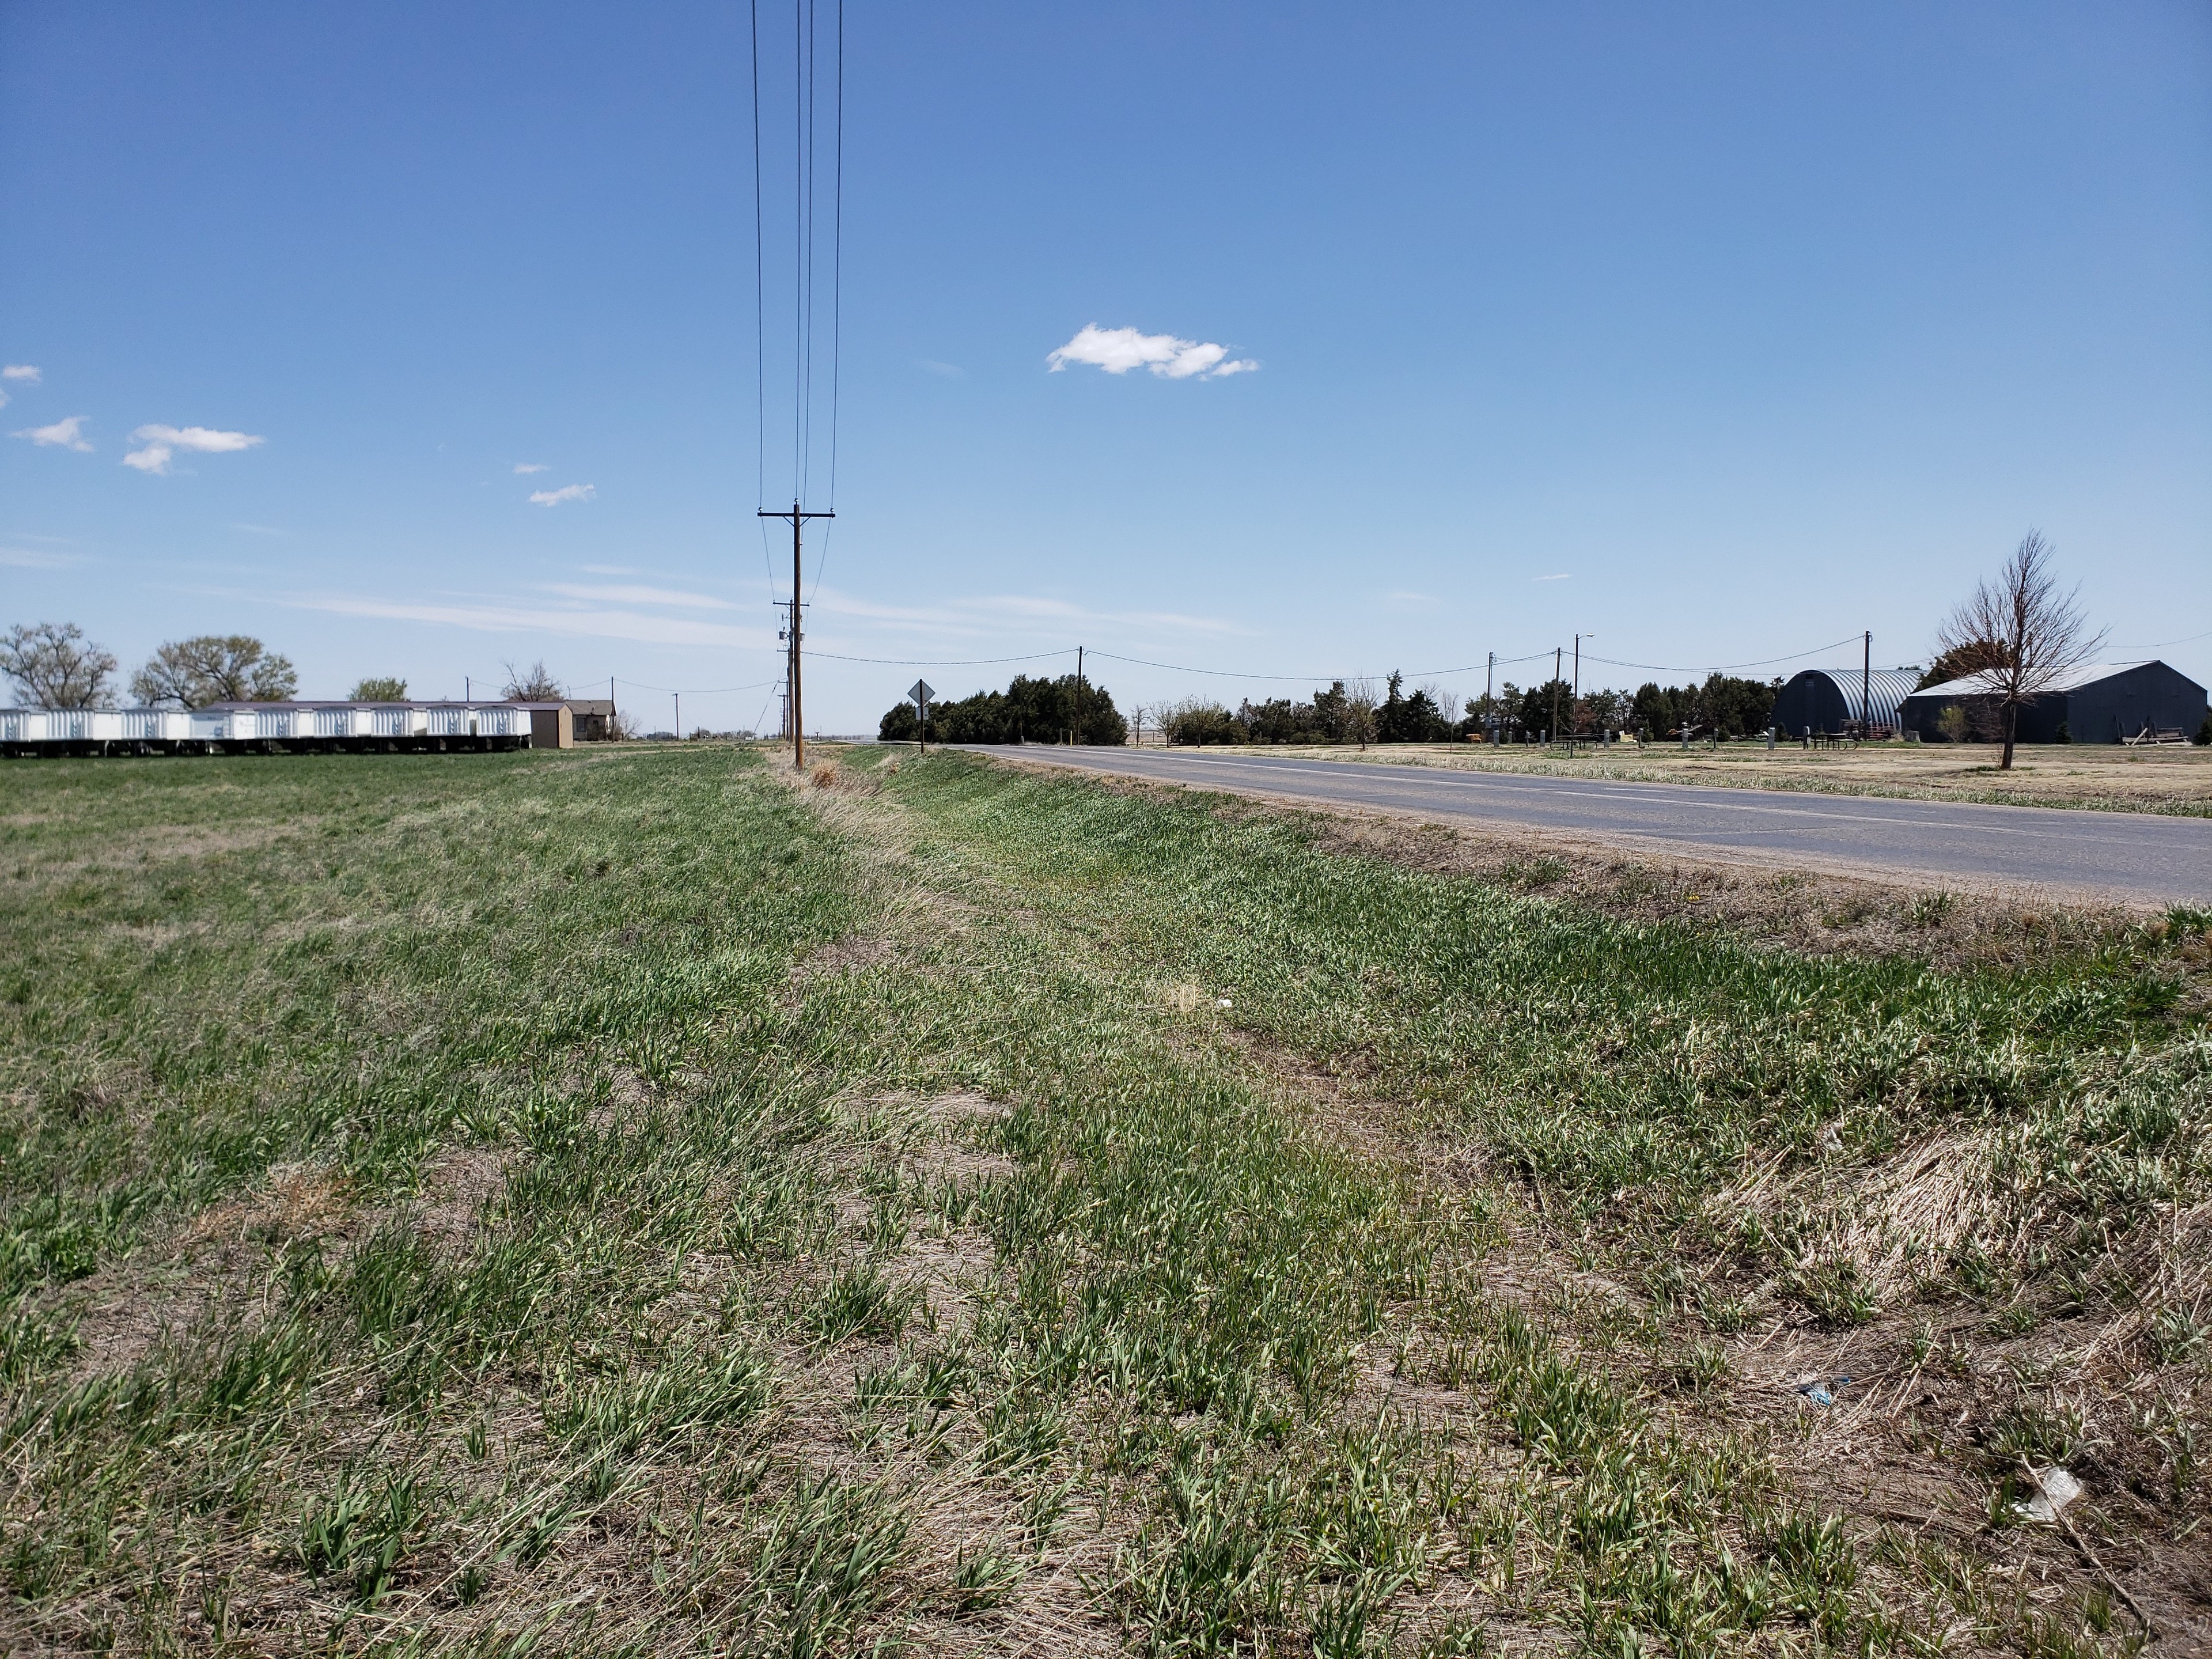 14. Frontage Rd